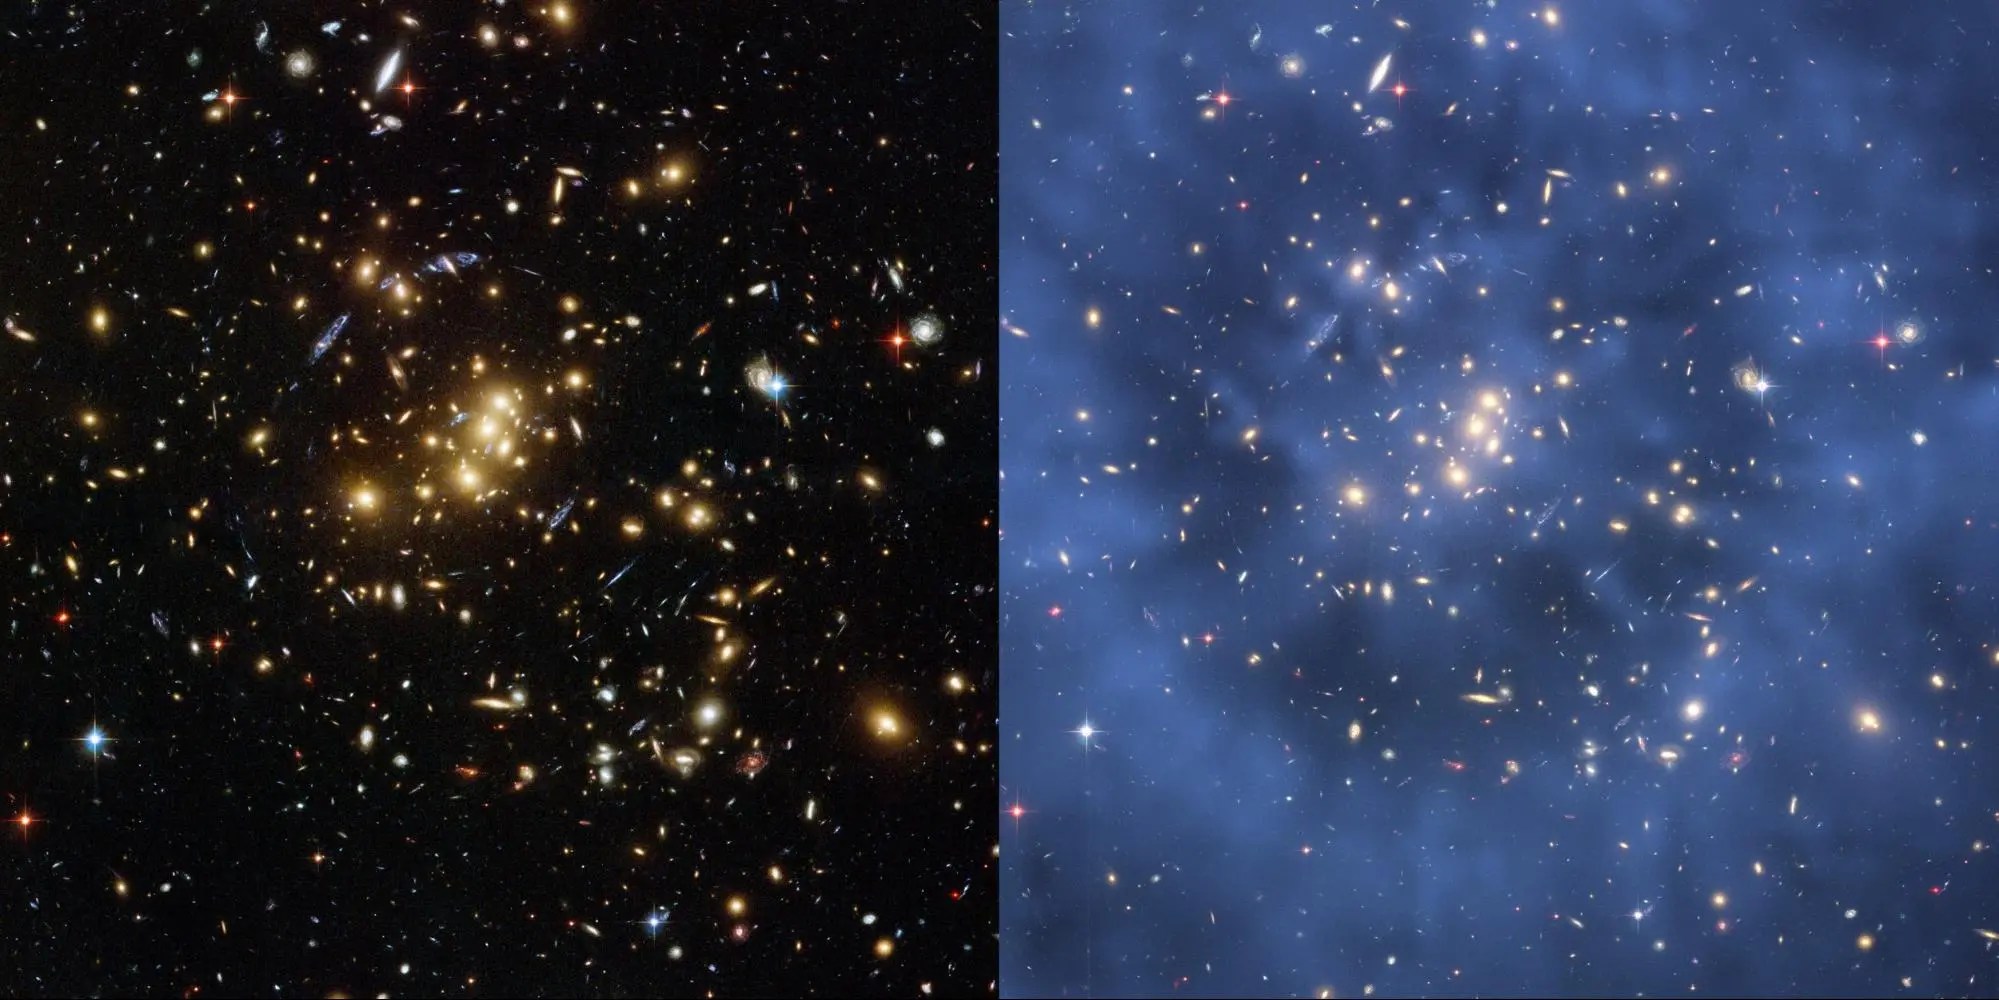 side-by-side images of a galaxy cluster